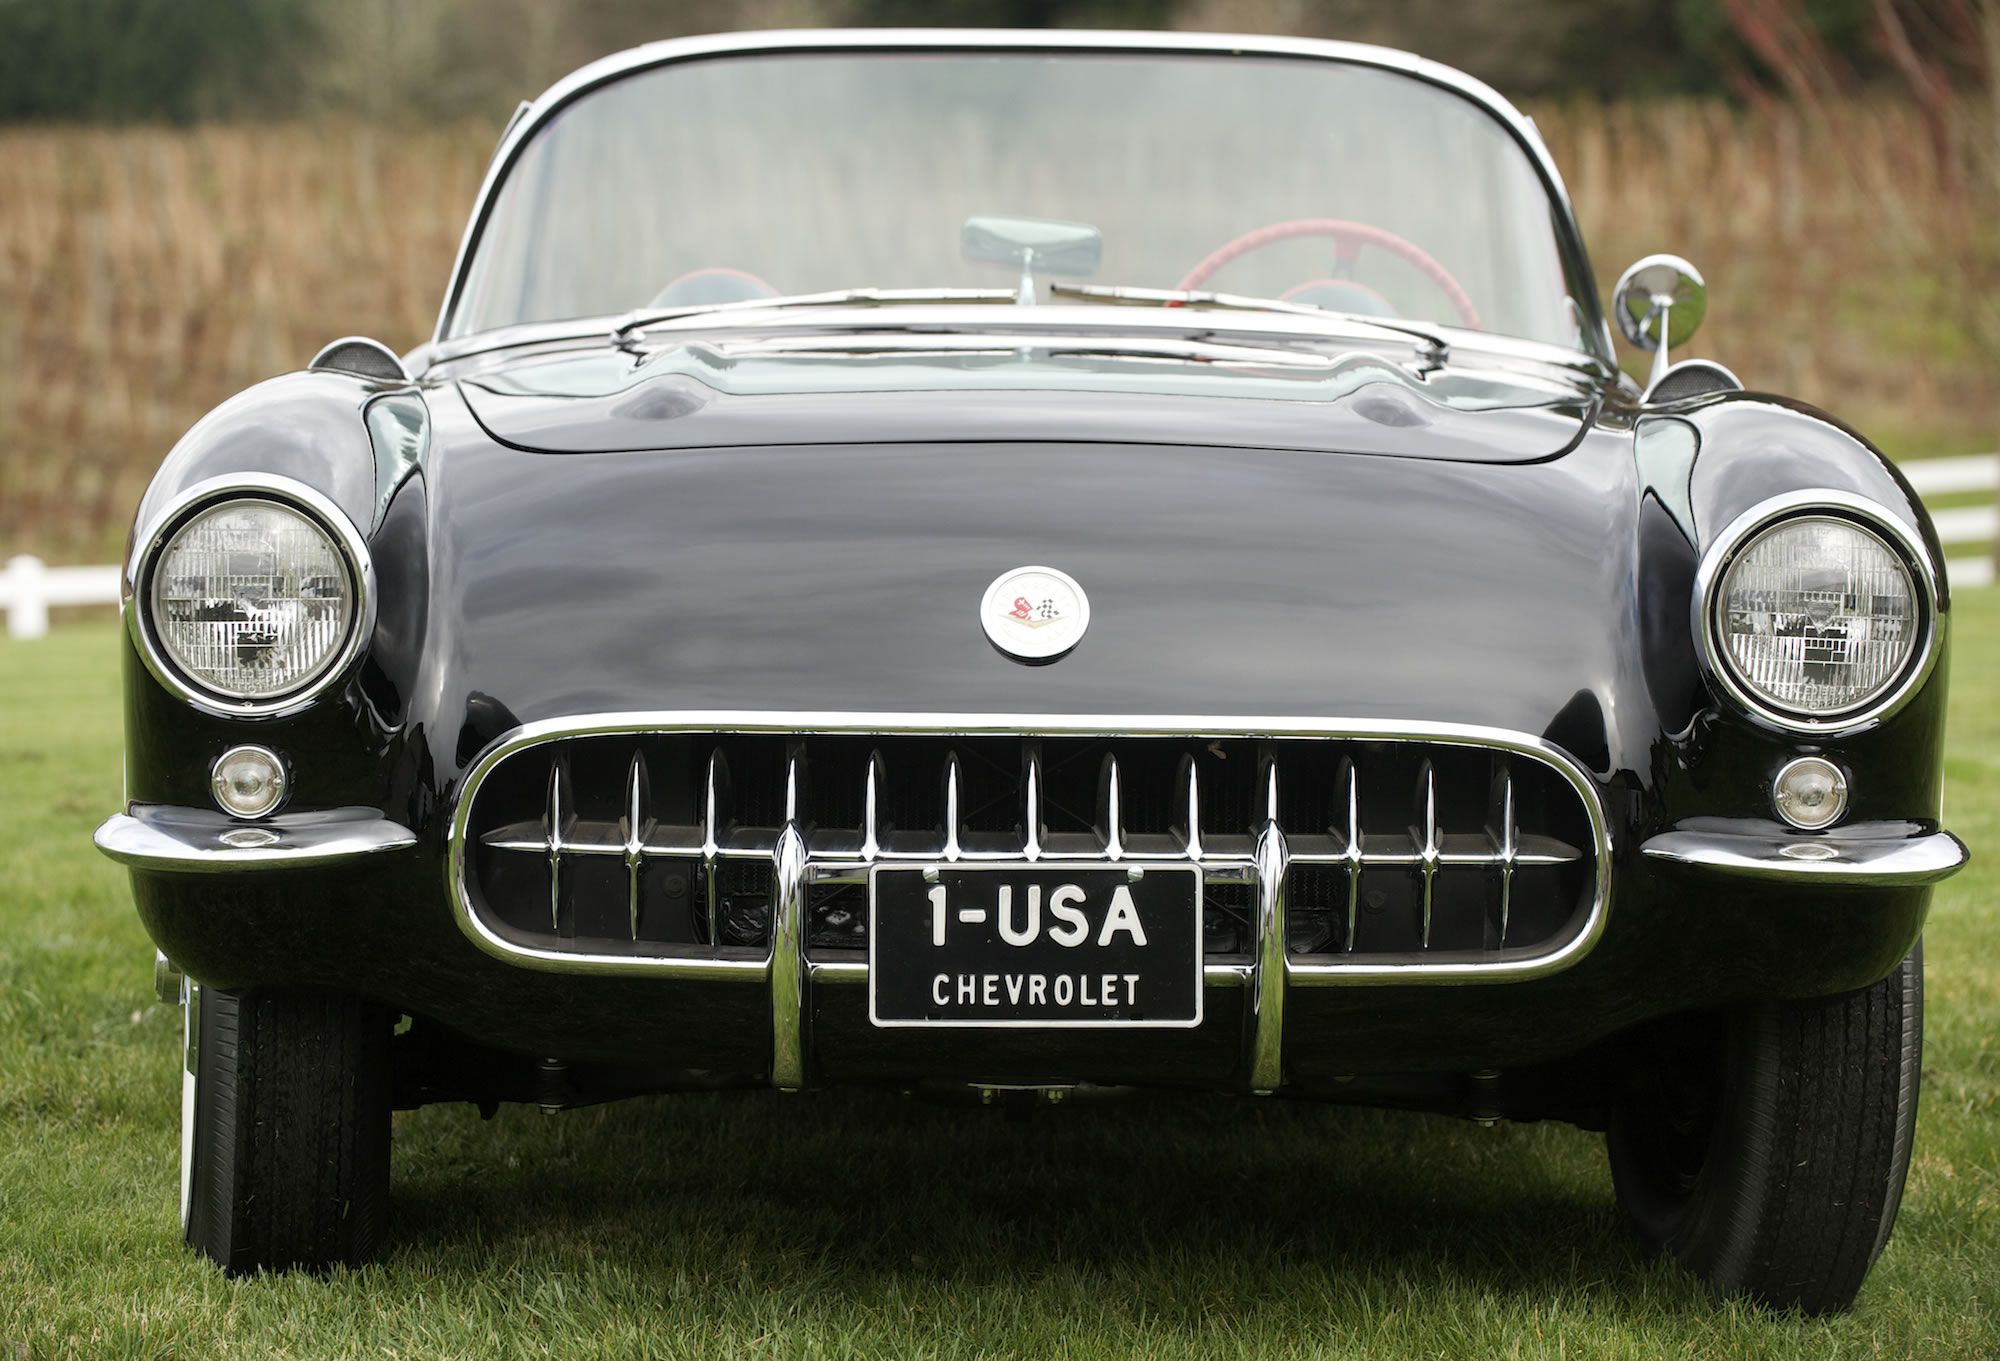 Onyx black was the most popular paint for the 1957 Corvette, with 2,189 cars coming in that color.